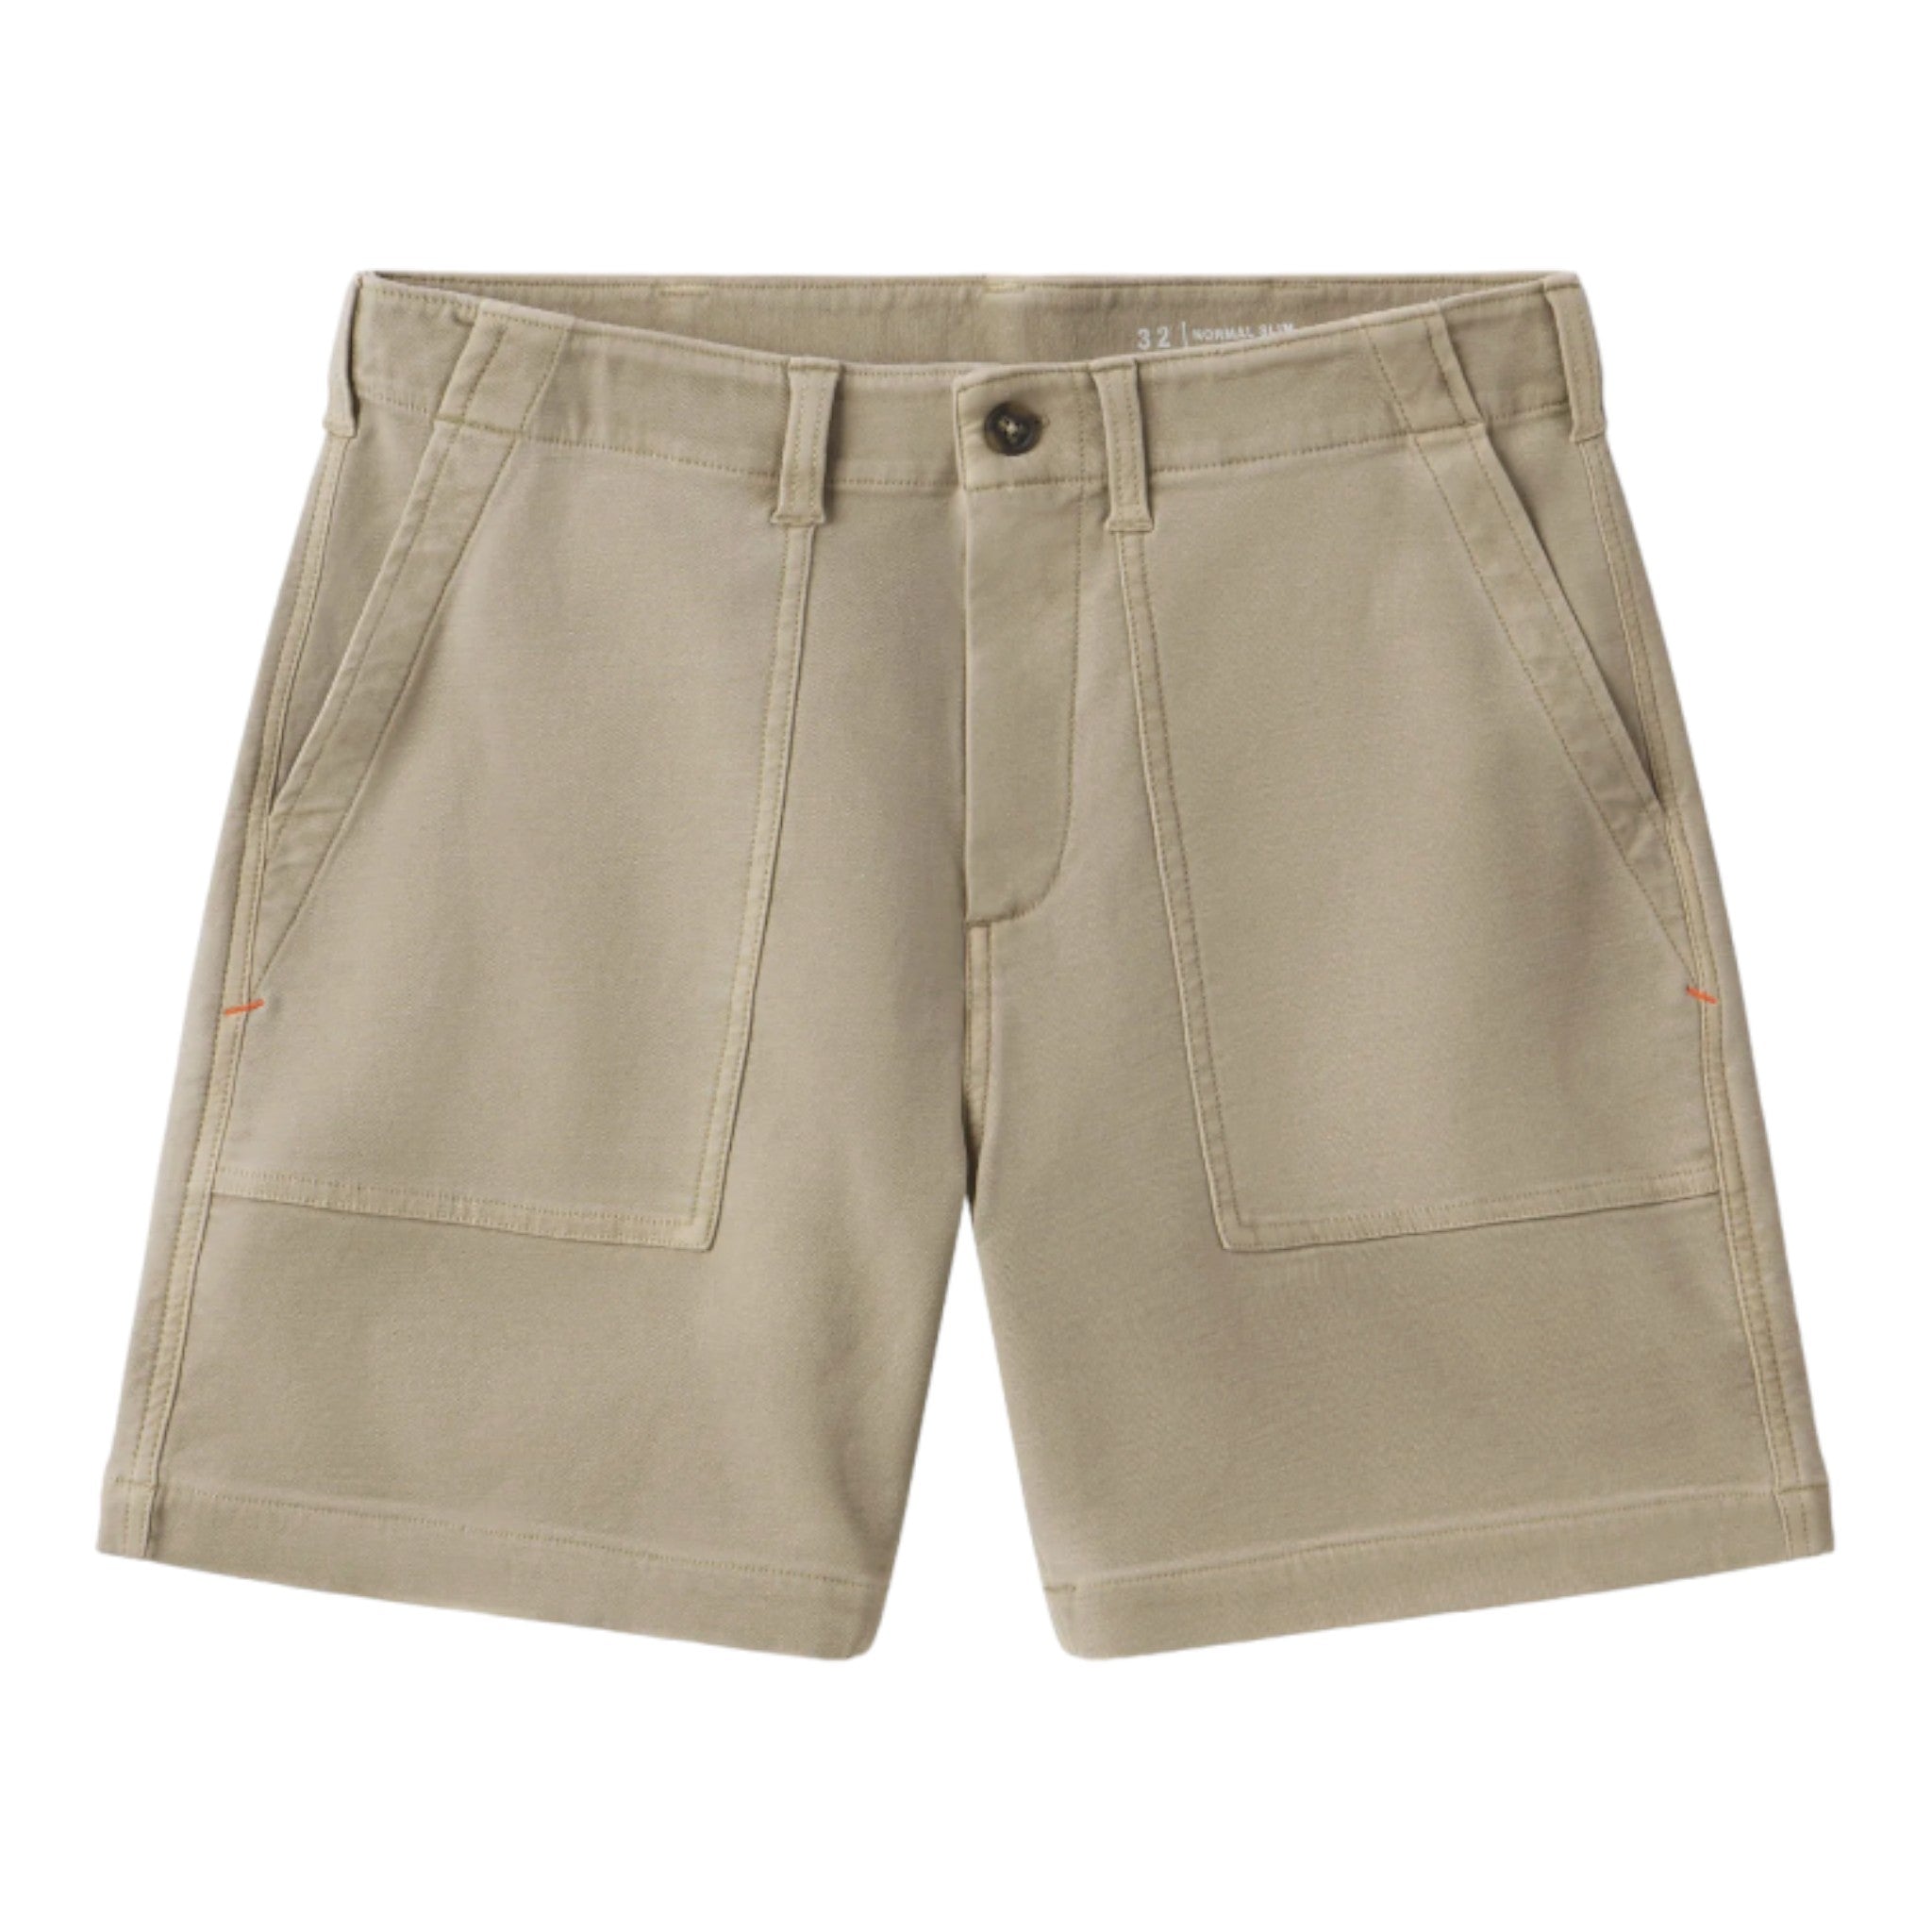 The Normal Brand - Comfort Terry Utility Short - Sand Dune